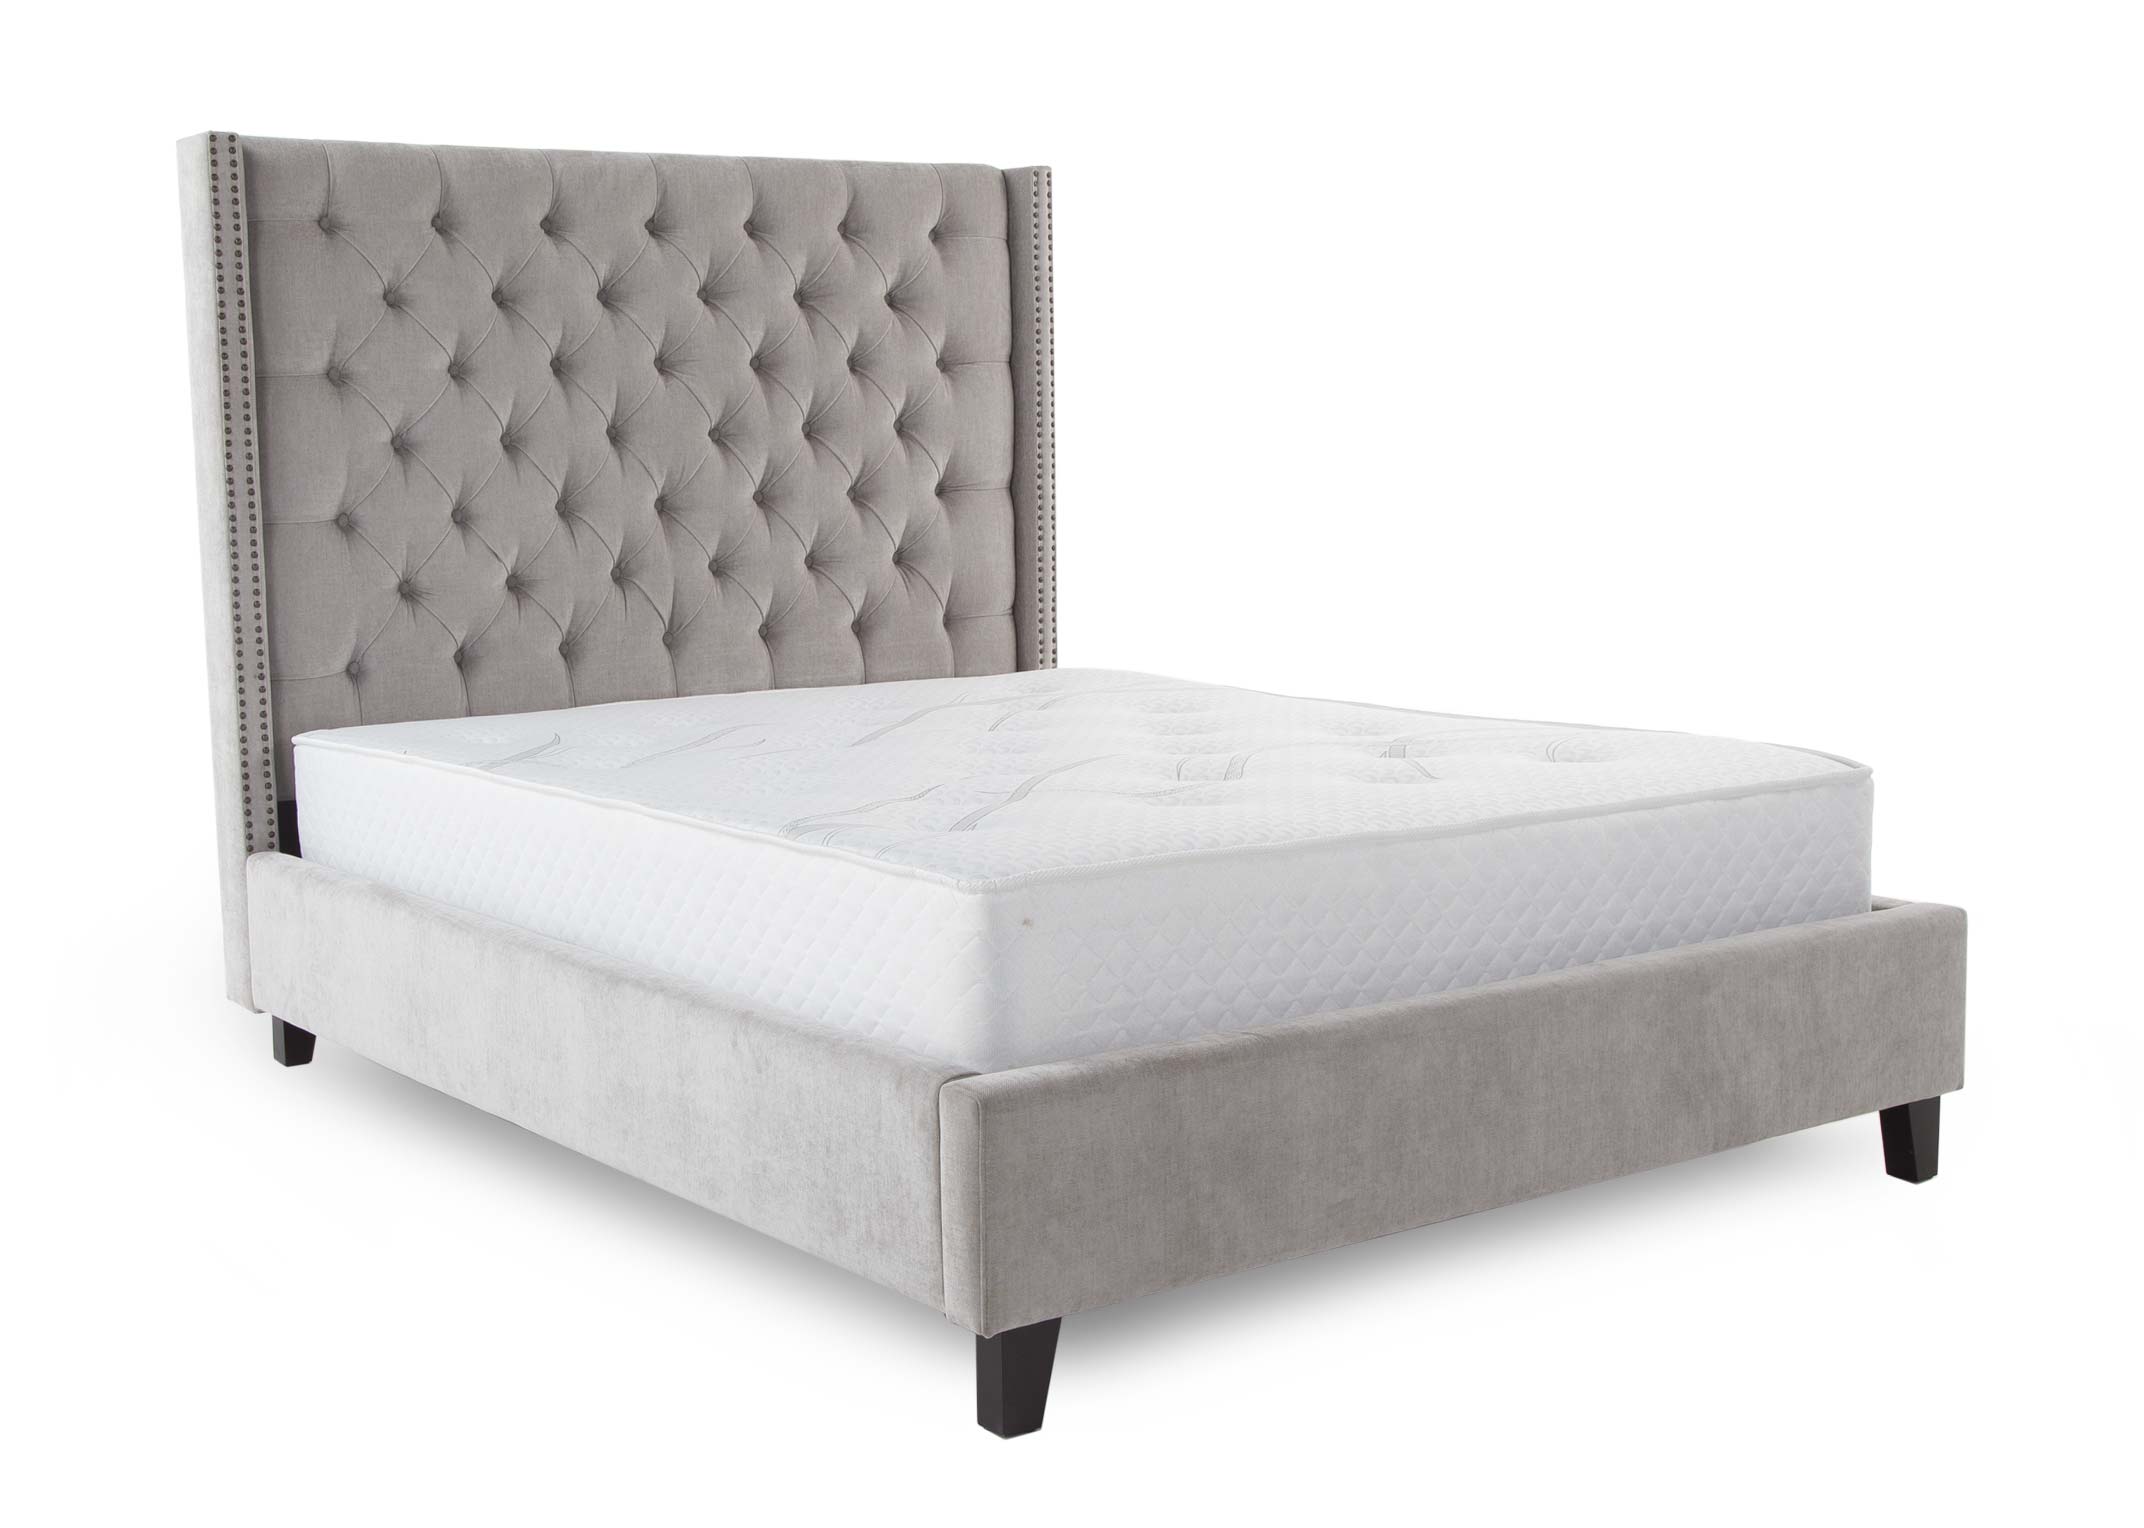 King Size 5ft Grey Fabric Bed Frame, King Size Grey Fabric Bed Frame